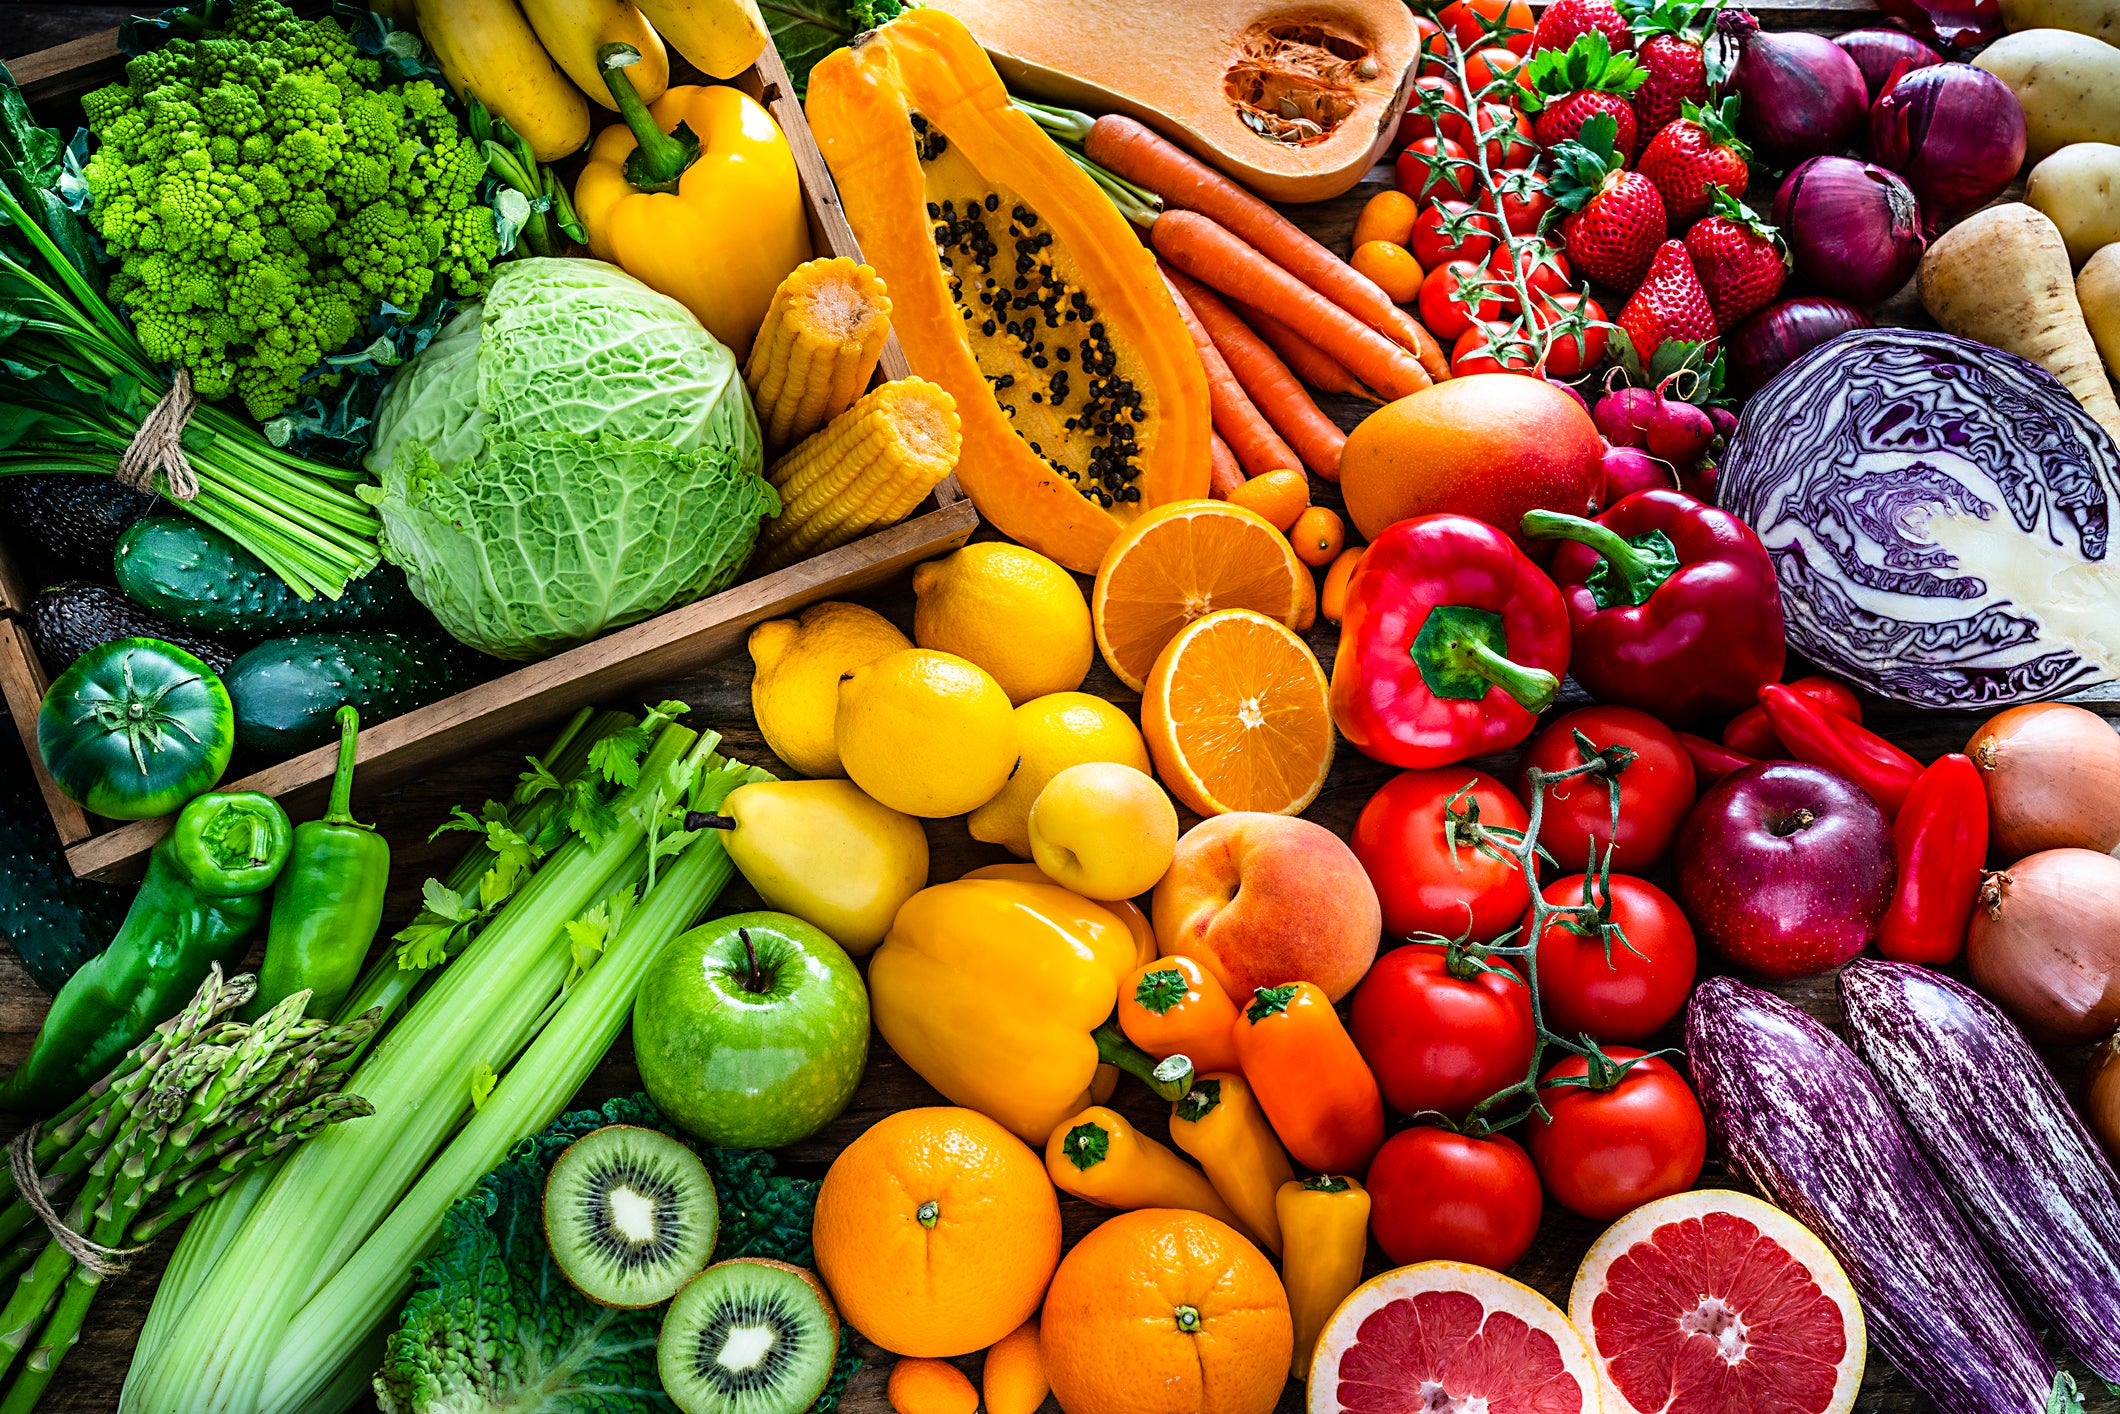 An environmental group announced the top 12 fruits and vegetables most covered with pesticides